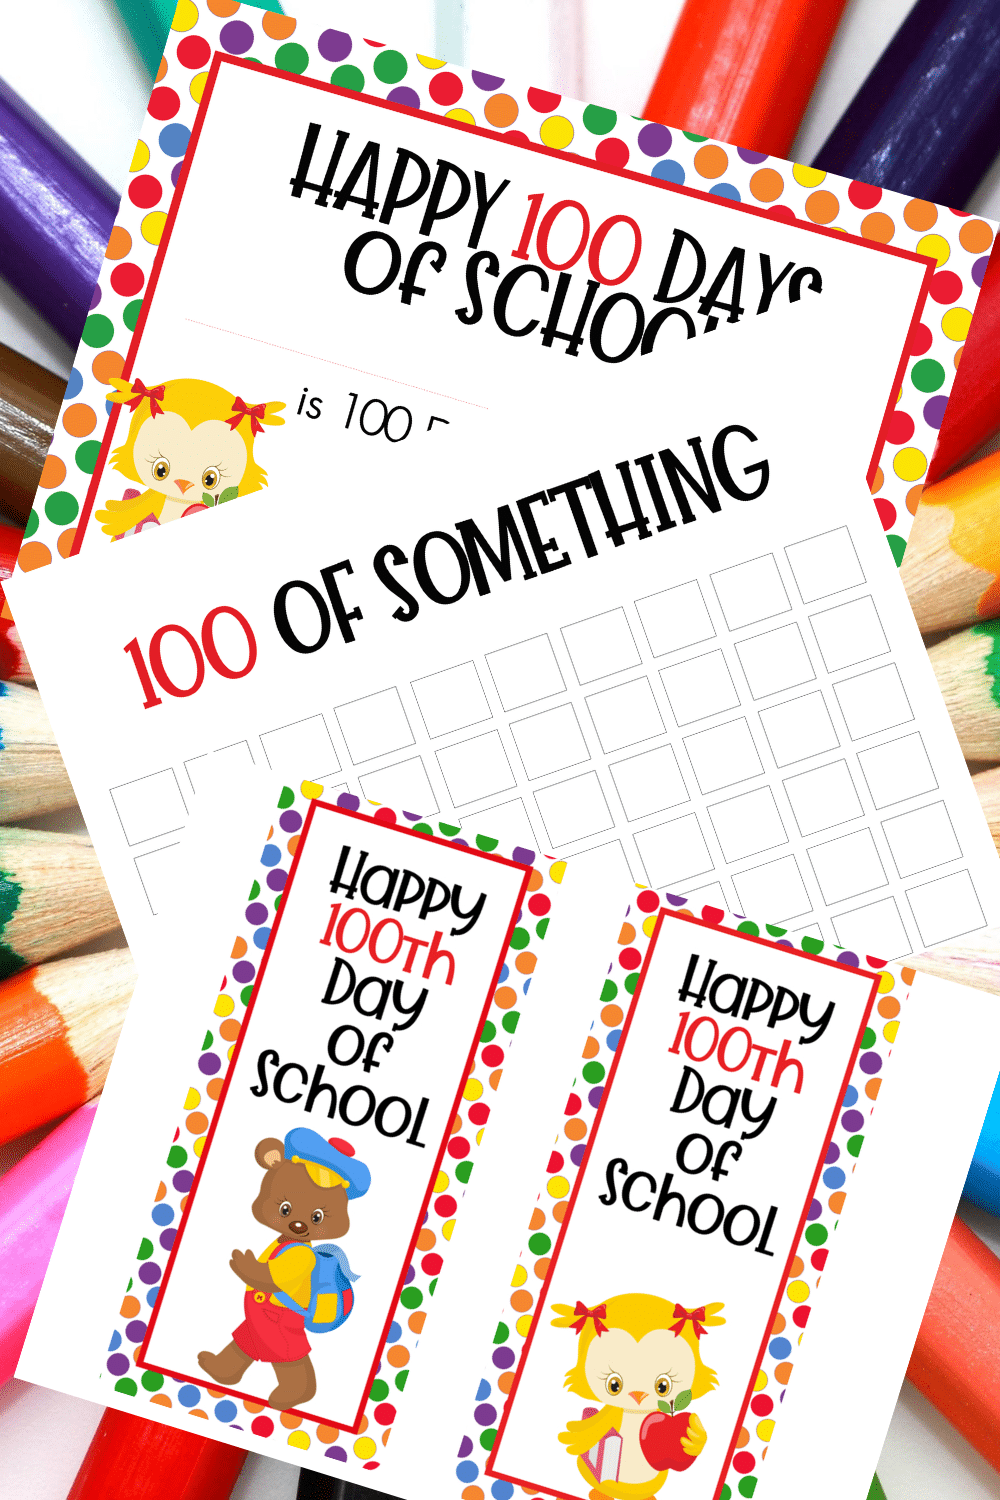 100th Day of School Printables with colorful pencils in the background